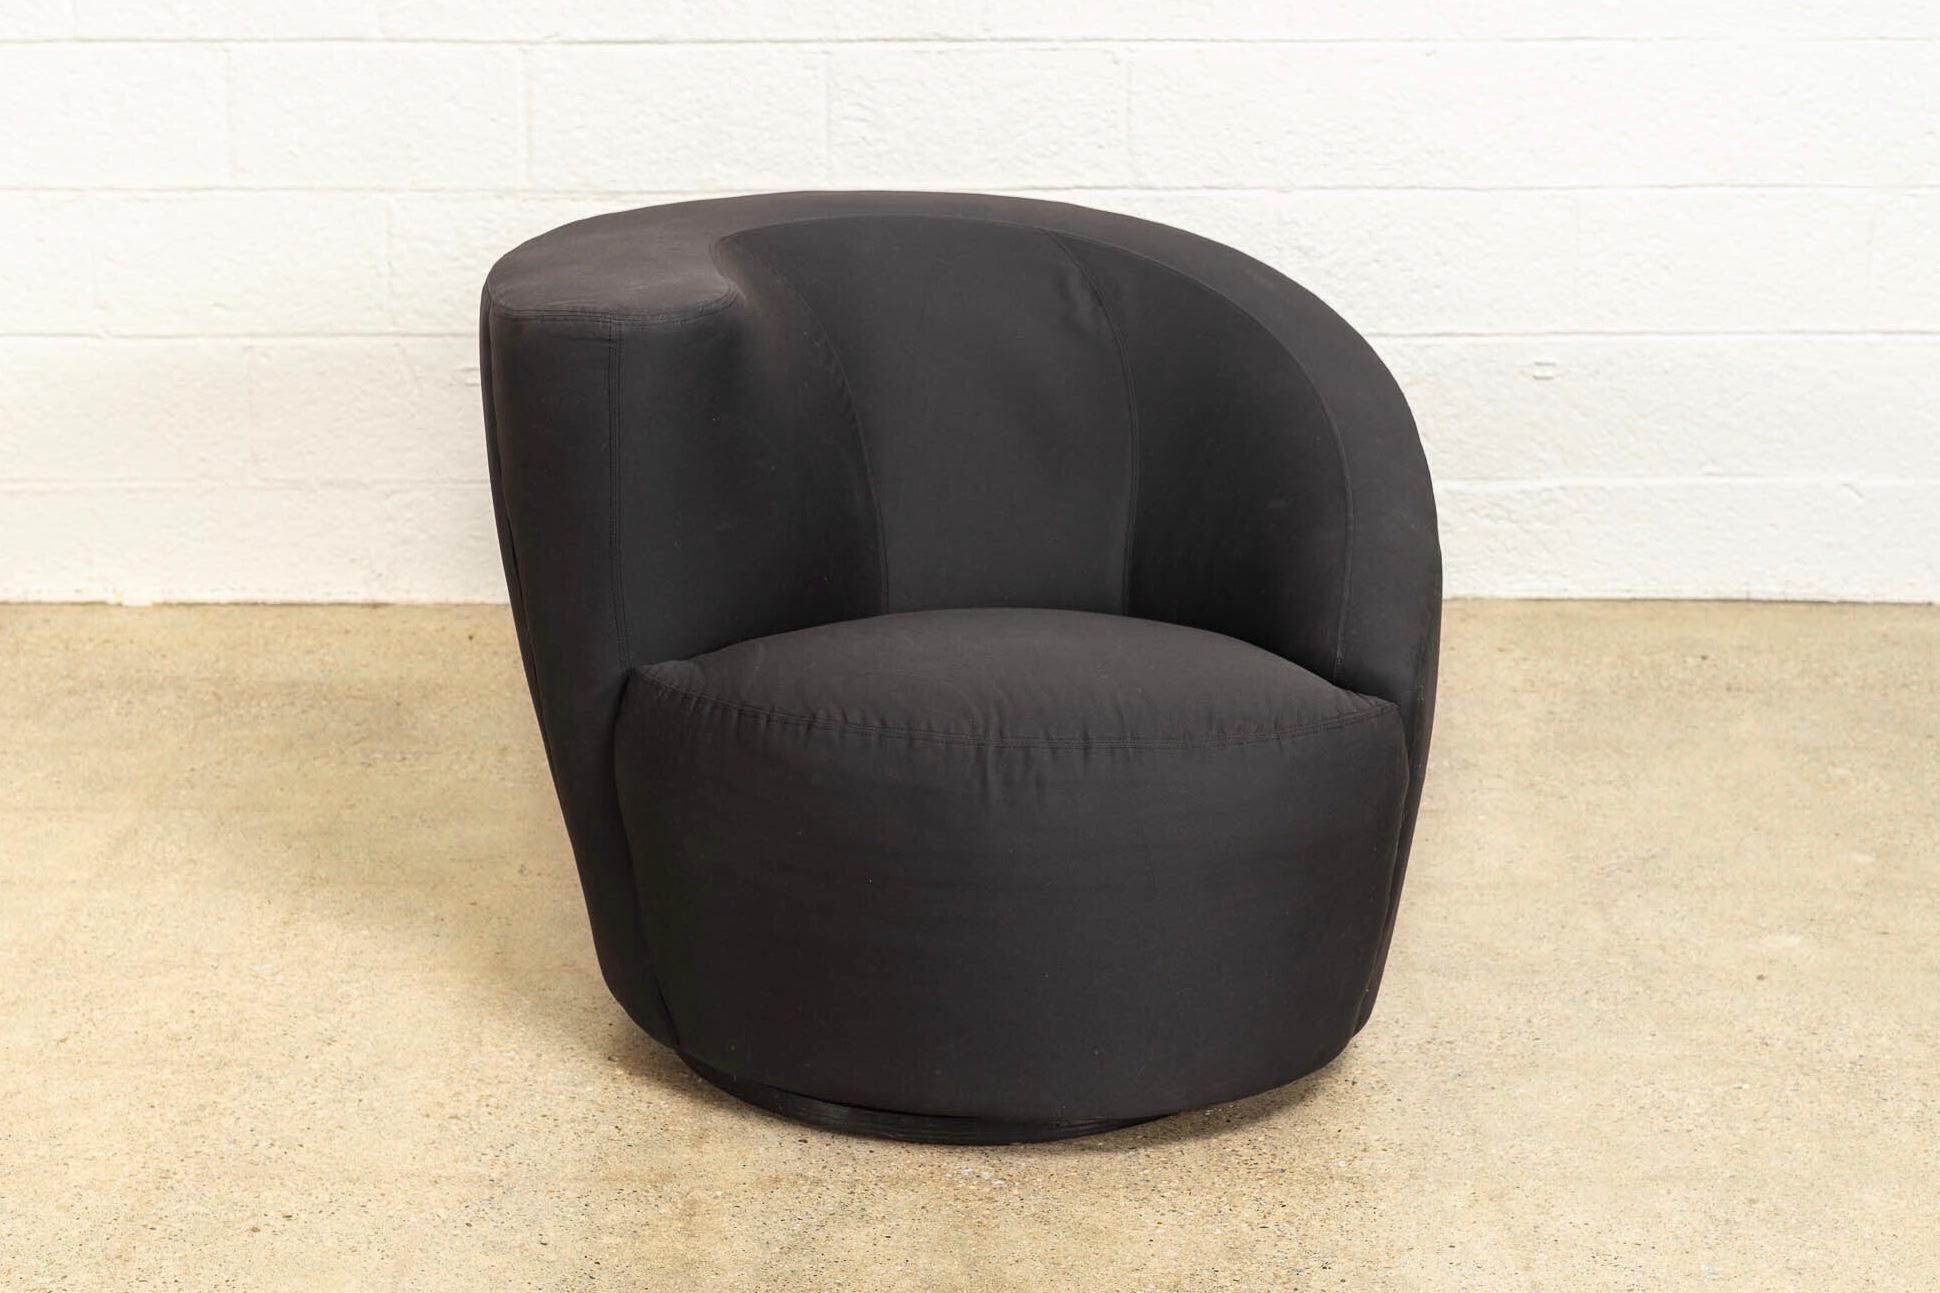 Cotton Midcentury Vladimir Kagan for Directional Black Nautilus Lounge Chairs, a Pair For Sale